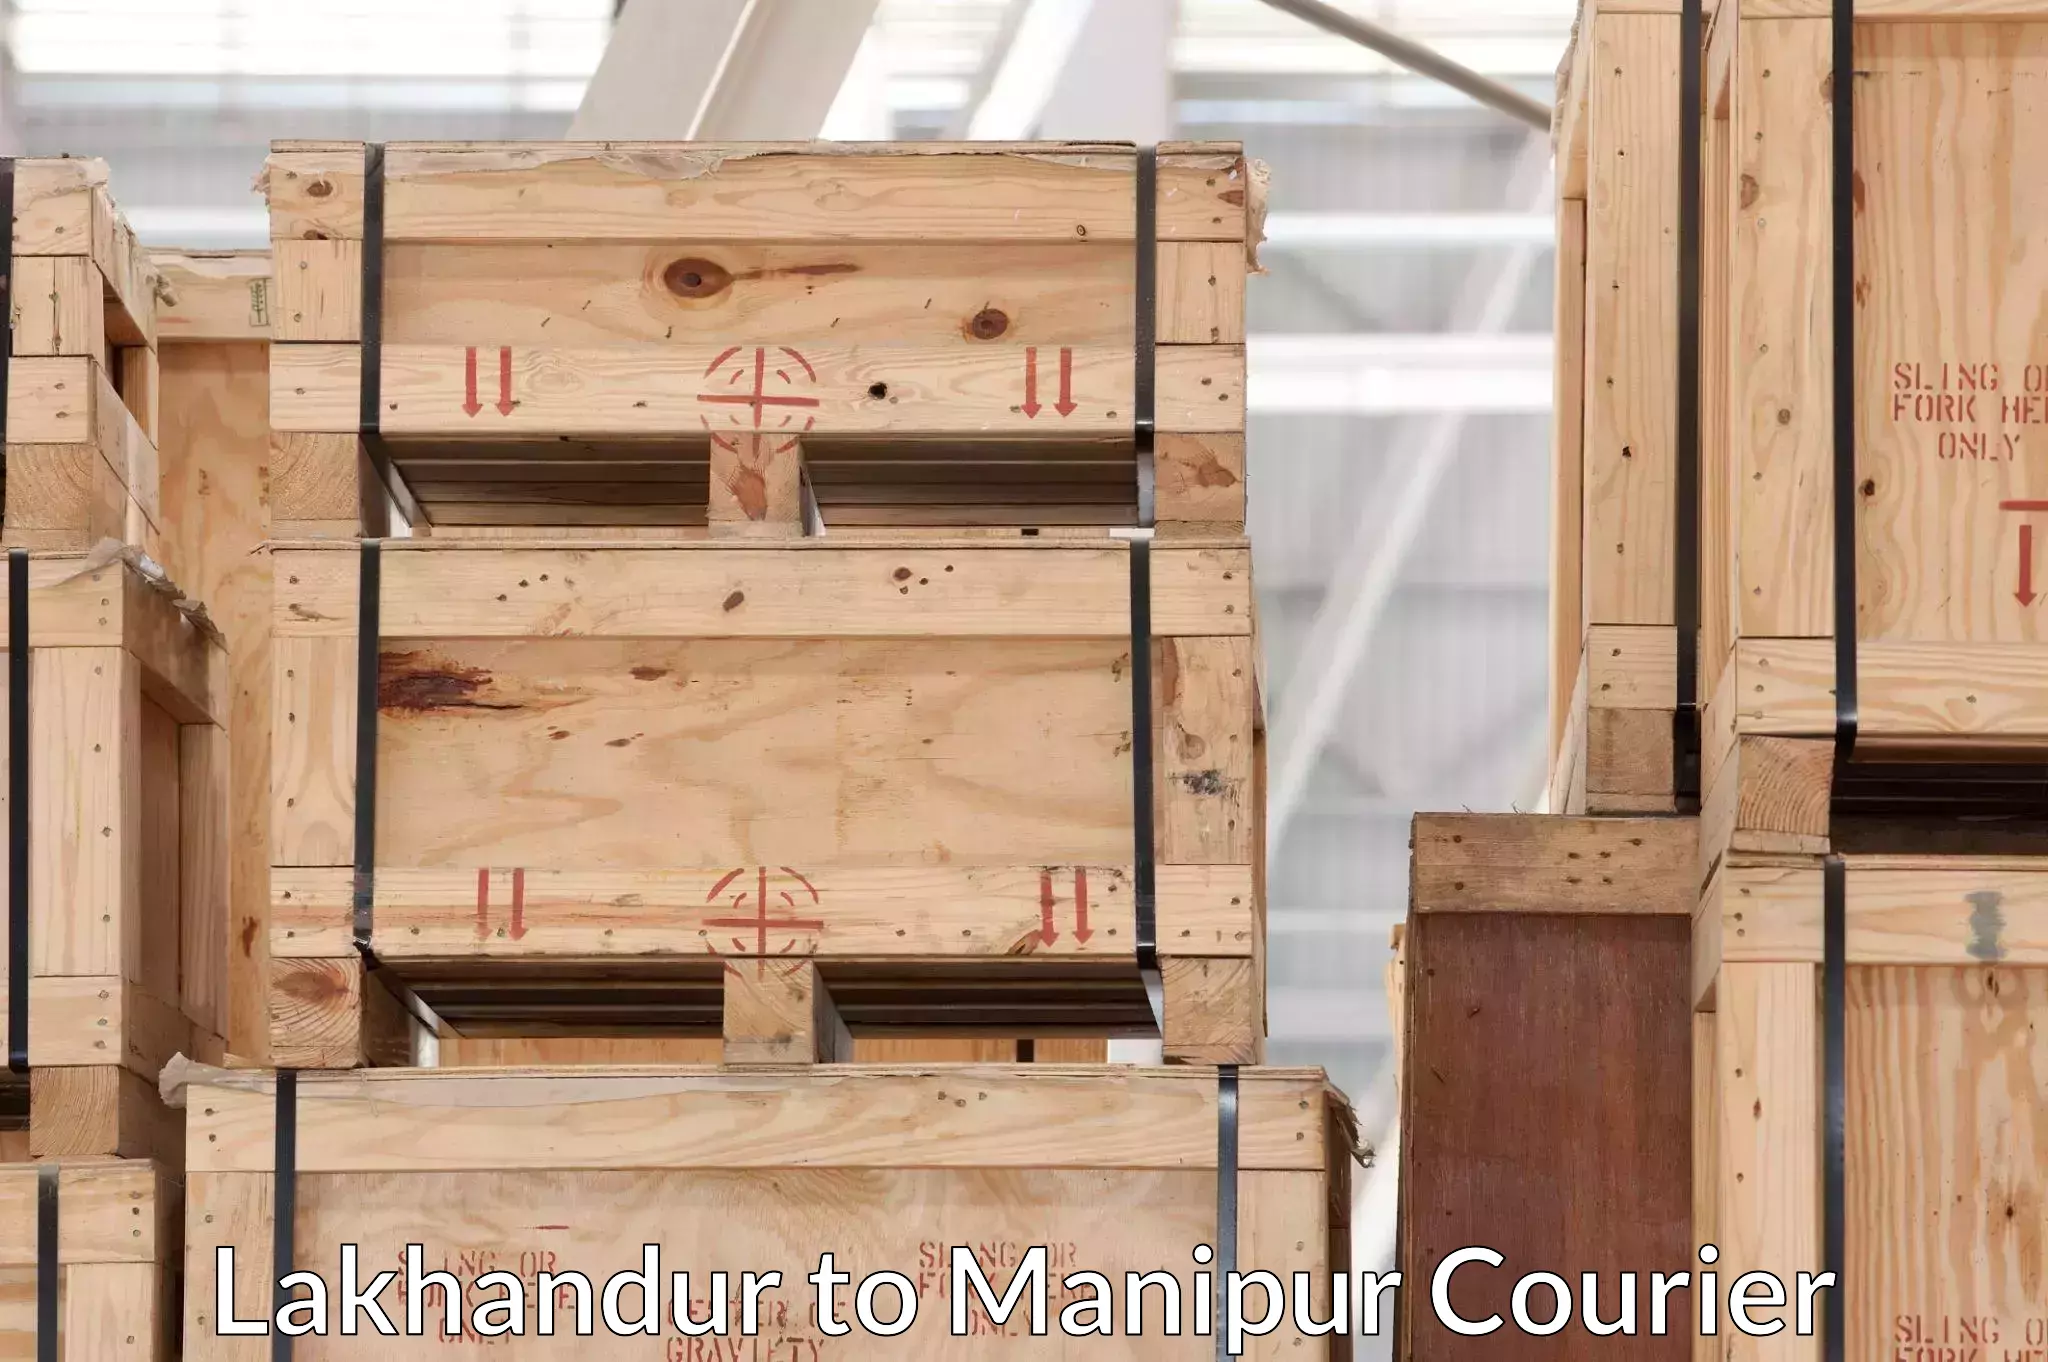 Furniture delivery service Lakhandur to Manipur